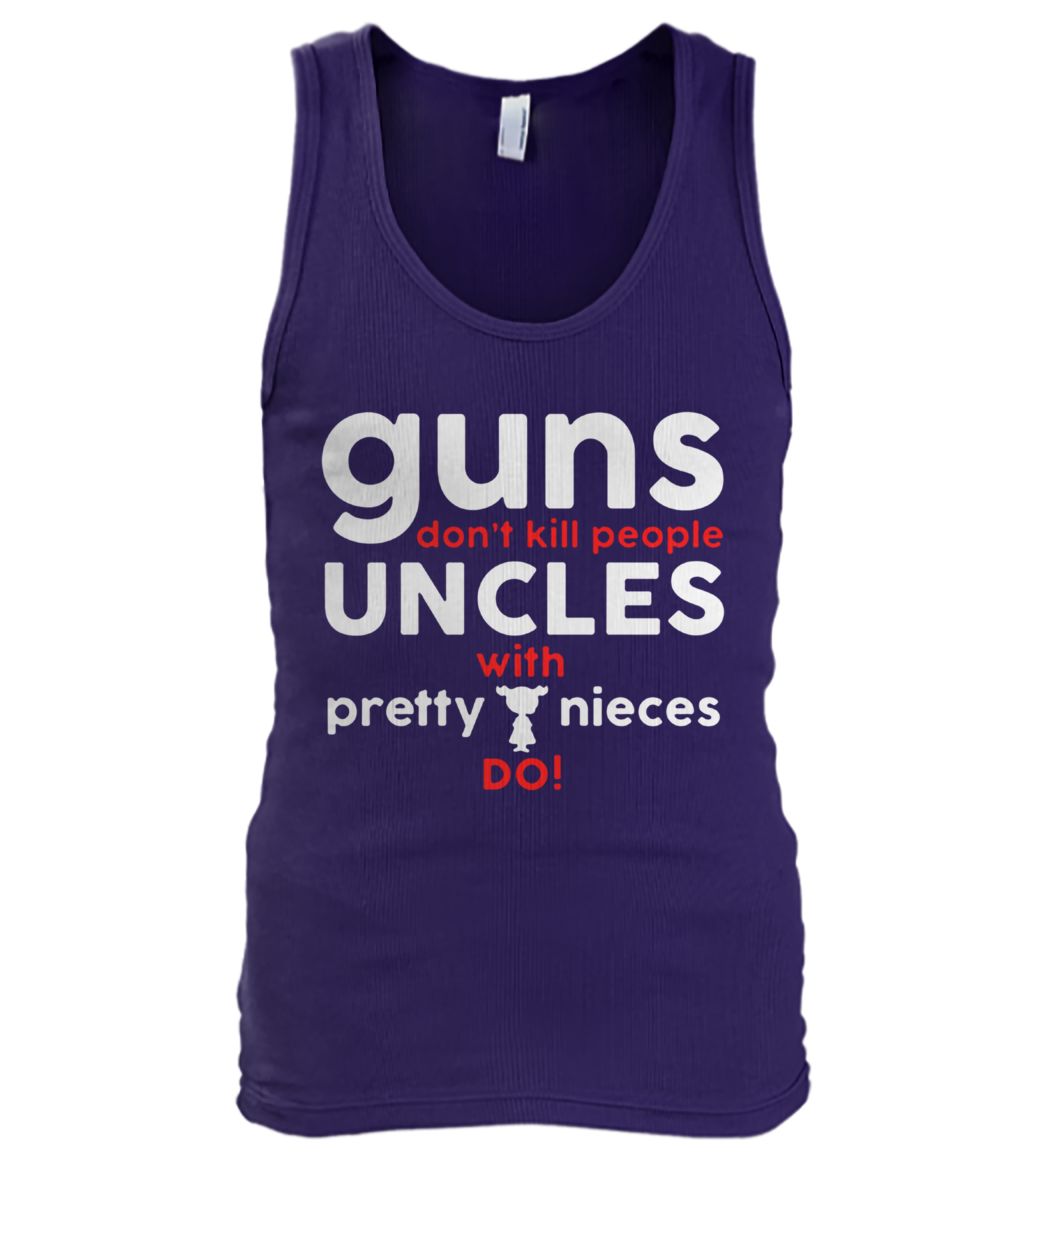 Guns don't kill people uncles with pretty nieces do men's tank top